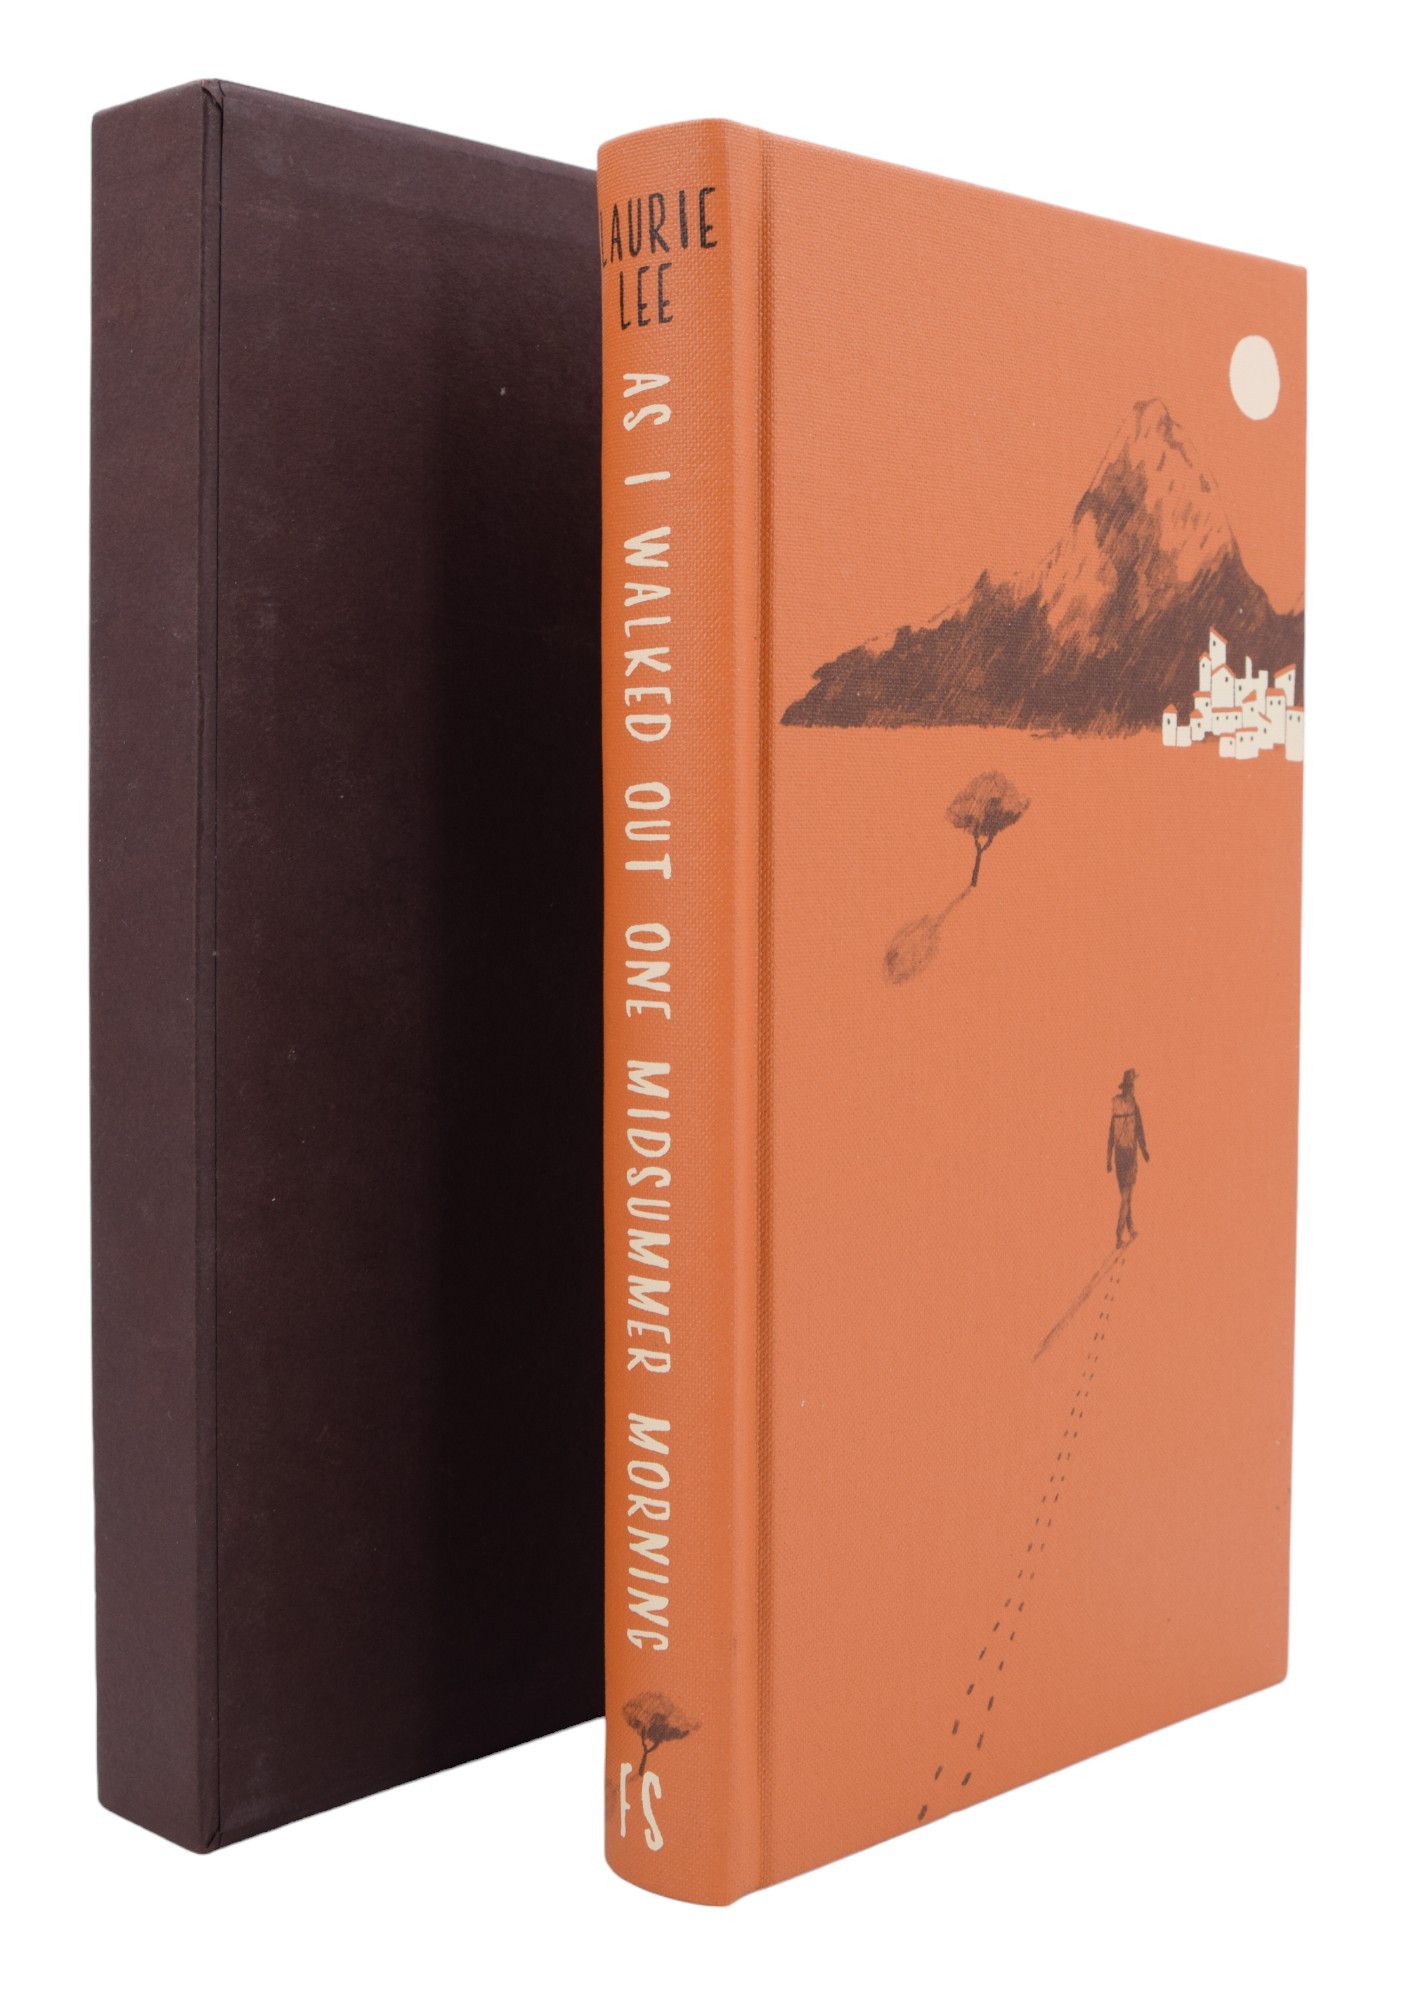 Seven Folio Society publications in slip cases, including Frances Wood, "The Silk Road", 2002; - Image 10 of 31